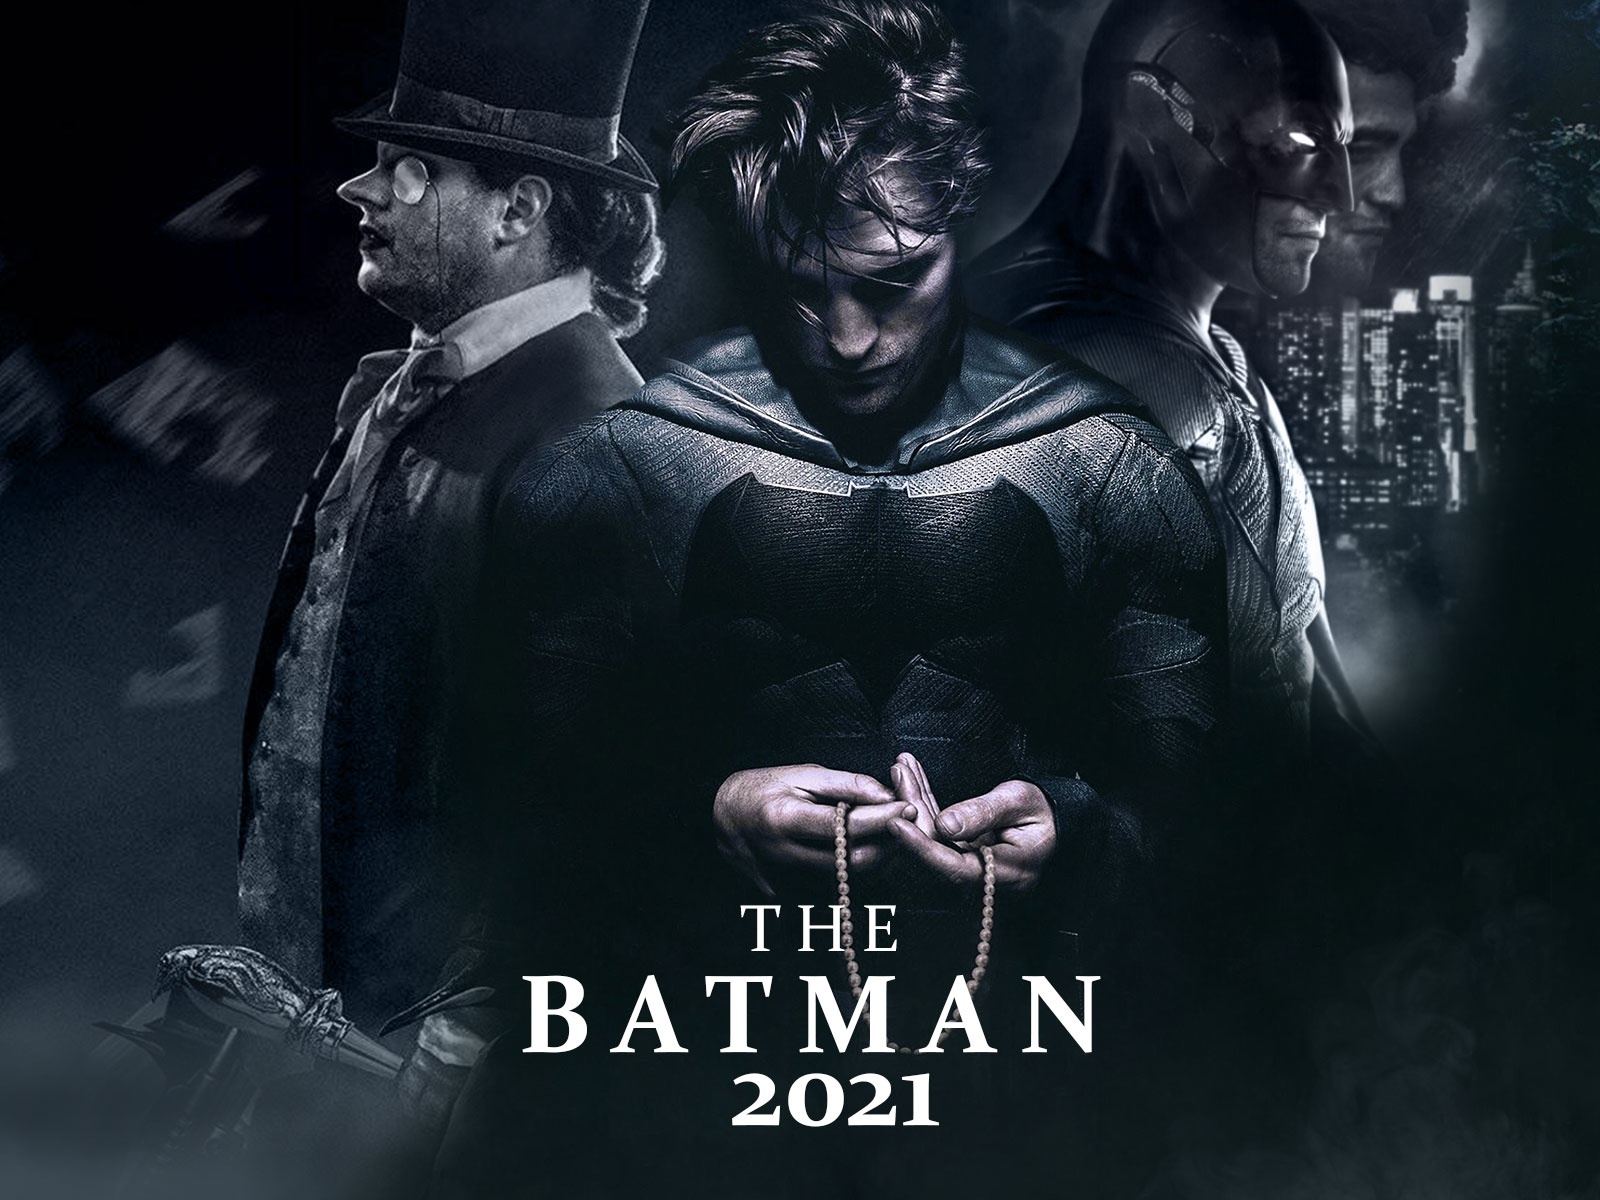 The "BATMAN" To Release In October 2021